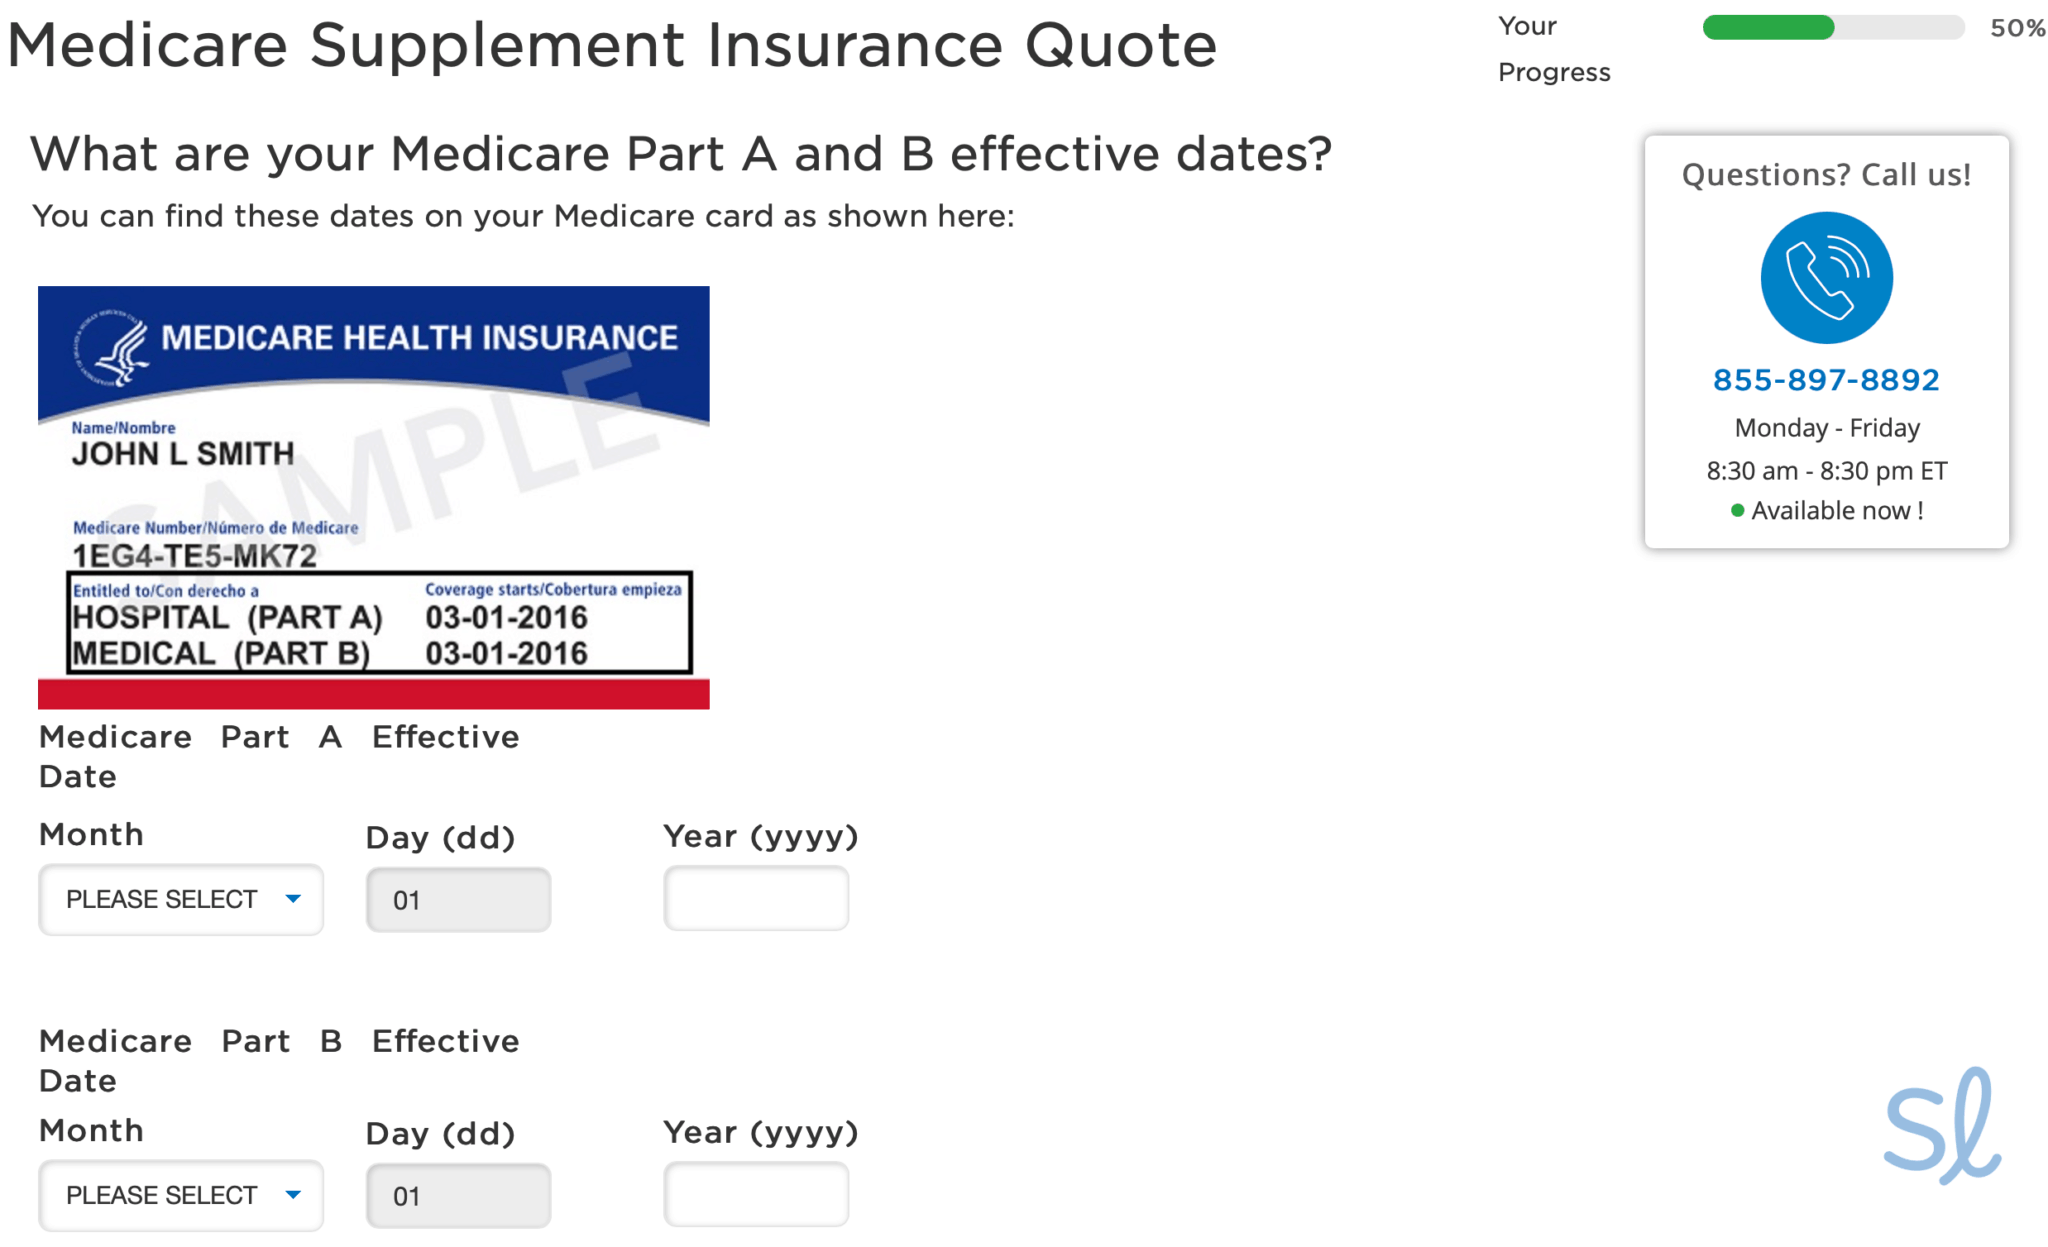 Cigna Medicare Supplement Plans Cost, Coverage & Review